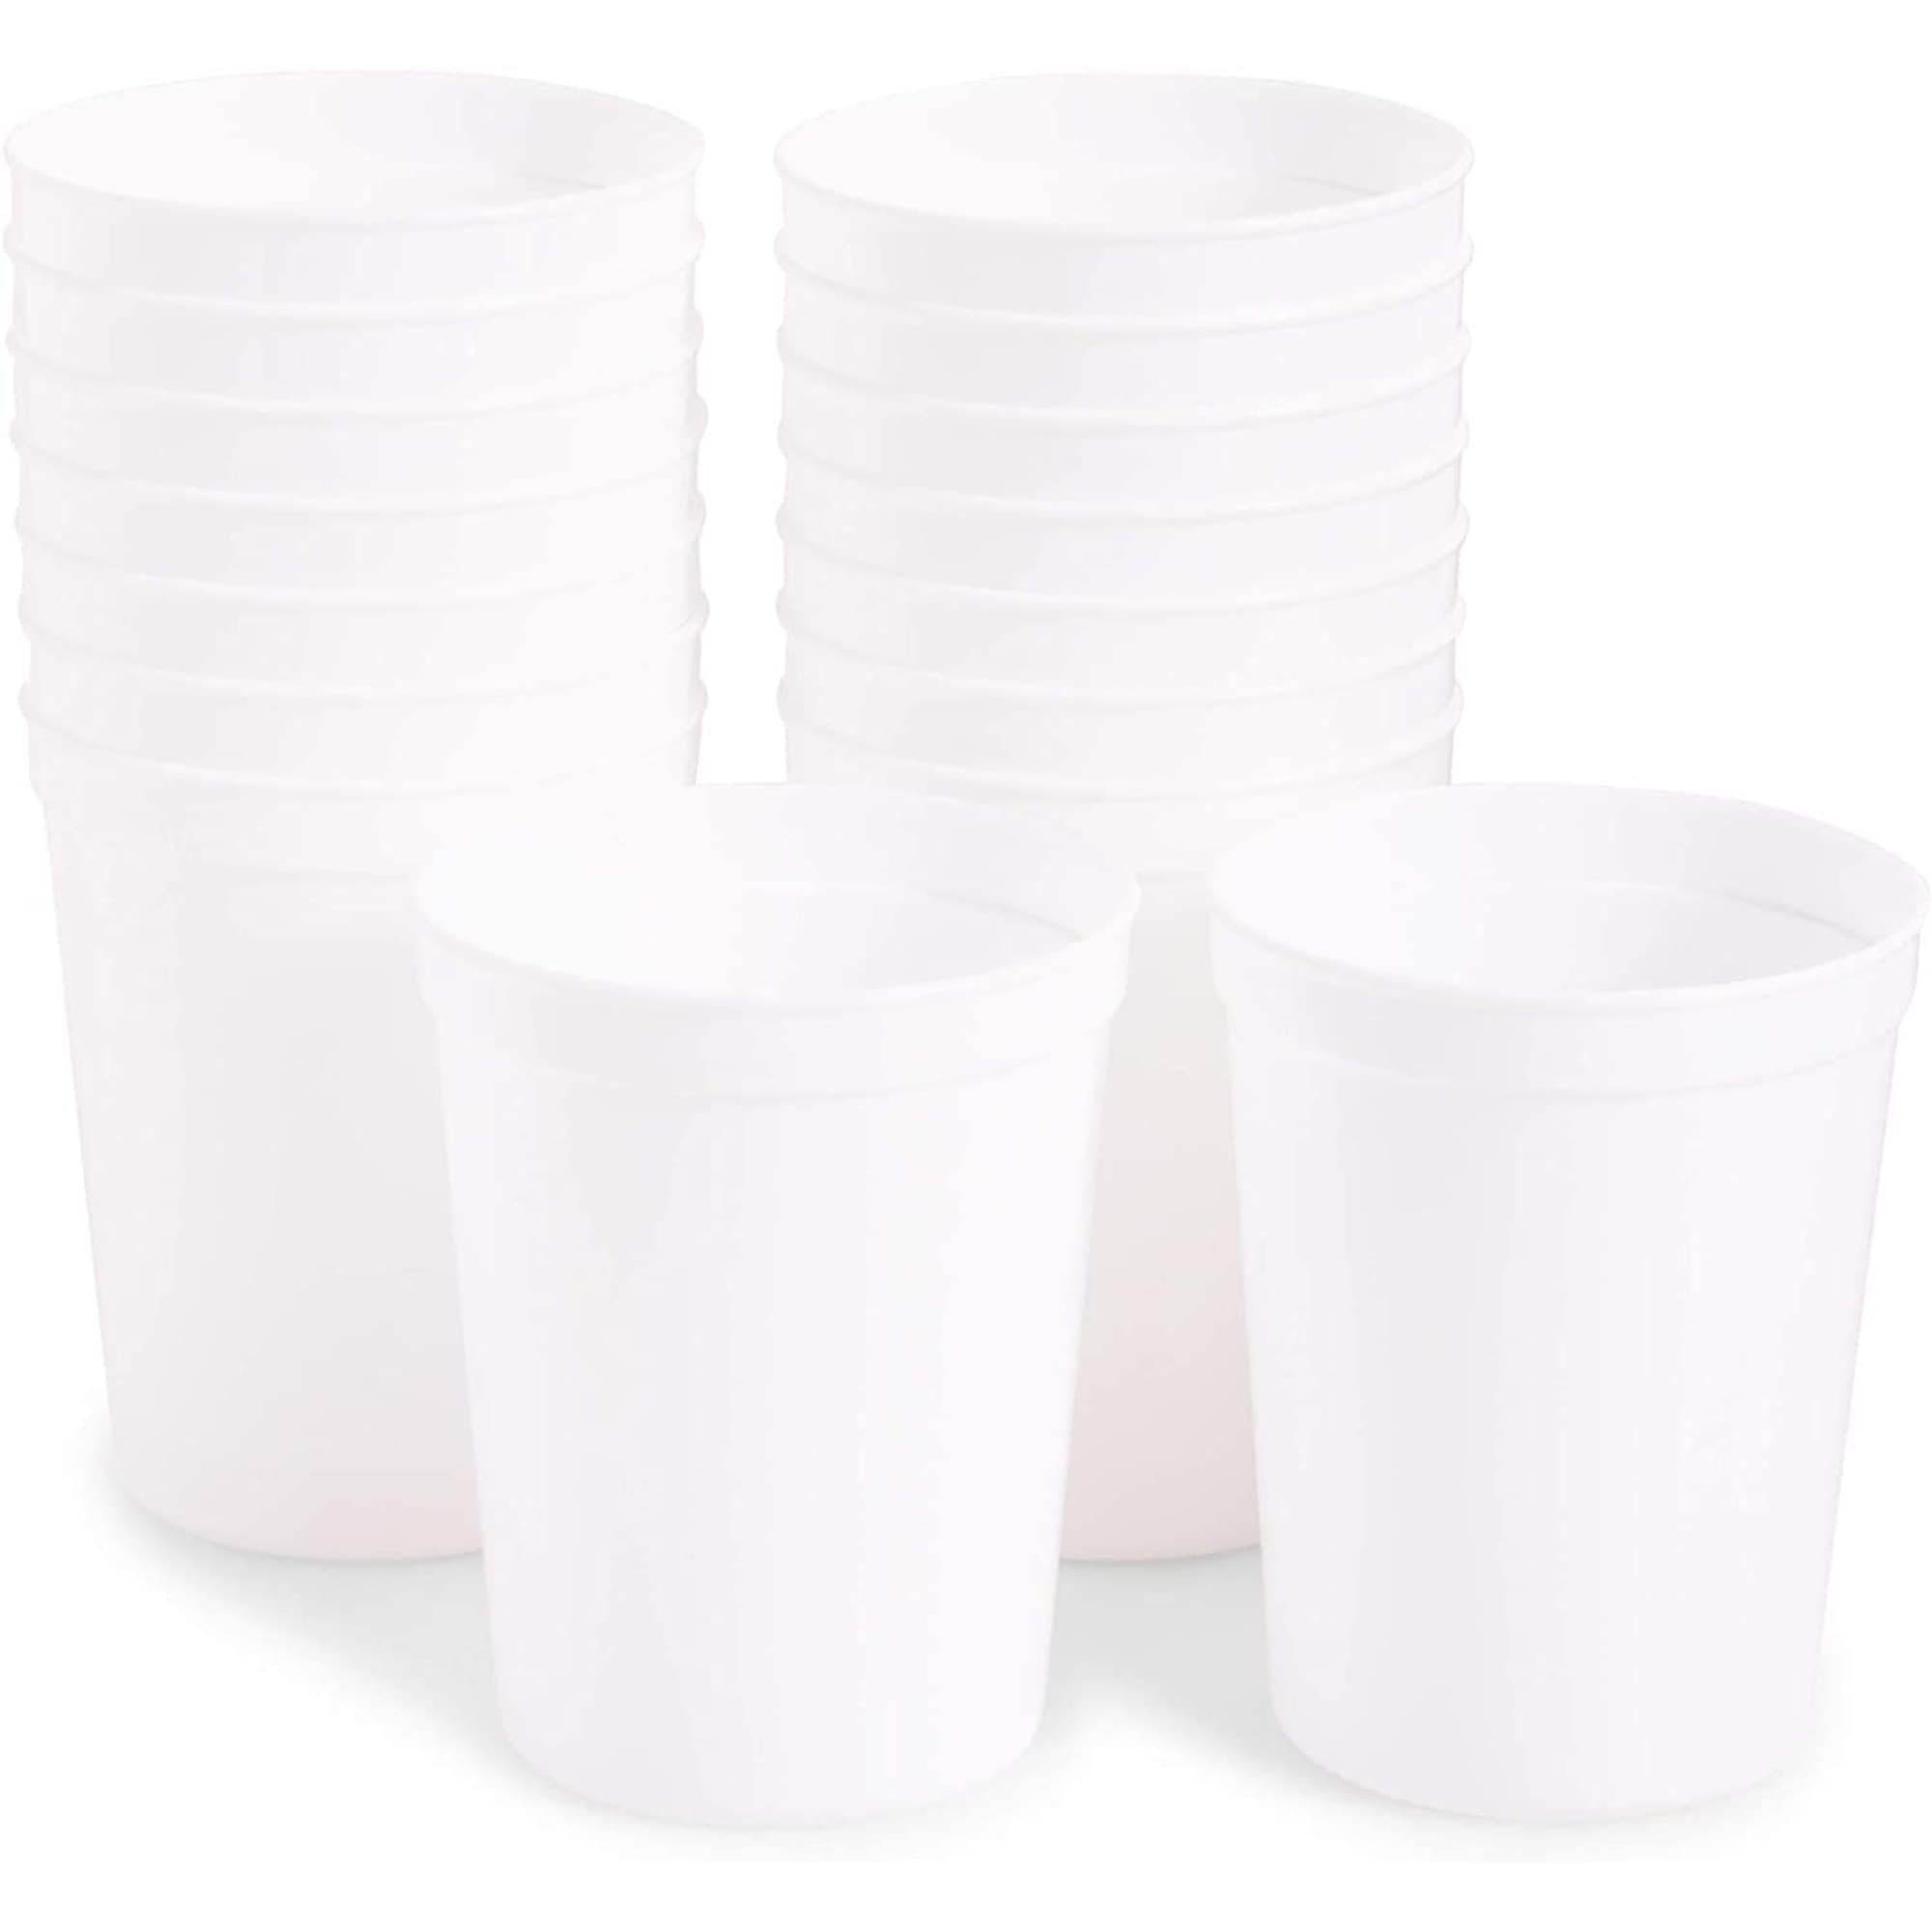 https://ak1.ostkcdn.com/images/products/is/images/direct/ccdfb93821cc79f1201069bcd38cd8b9870801ed/White-Stadium-Cups%2C-Reusable-Plastic-Party-Tumblers-%2816-oz%2C-16-Pack%29.jpg